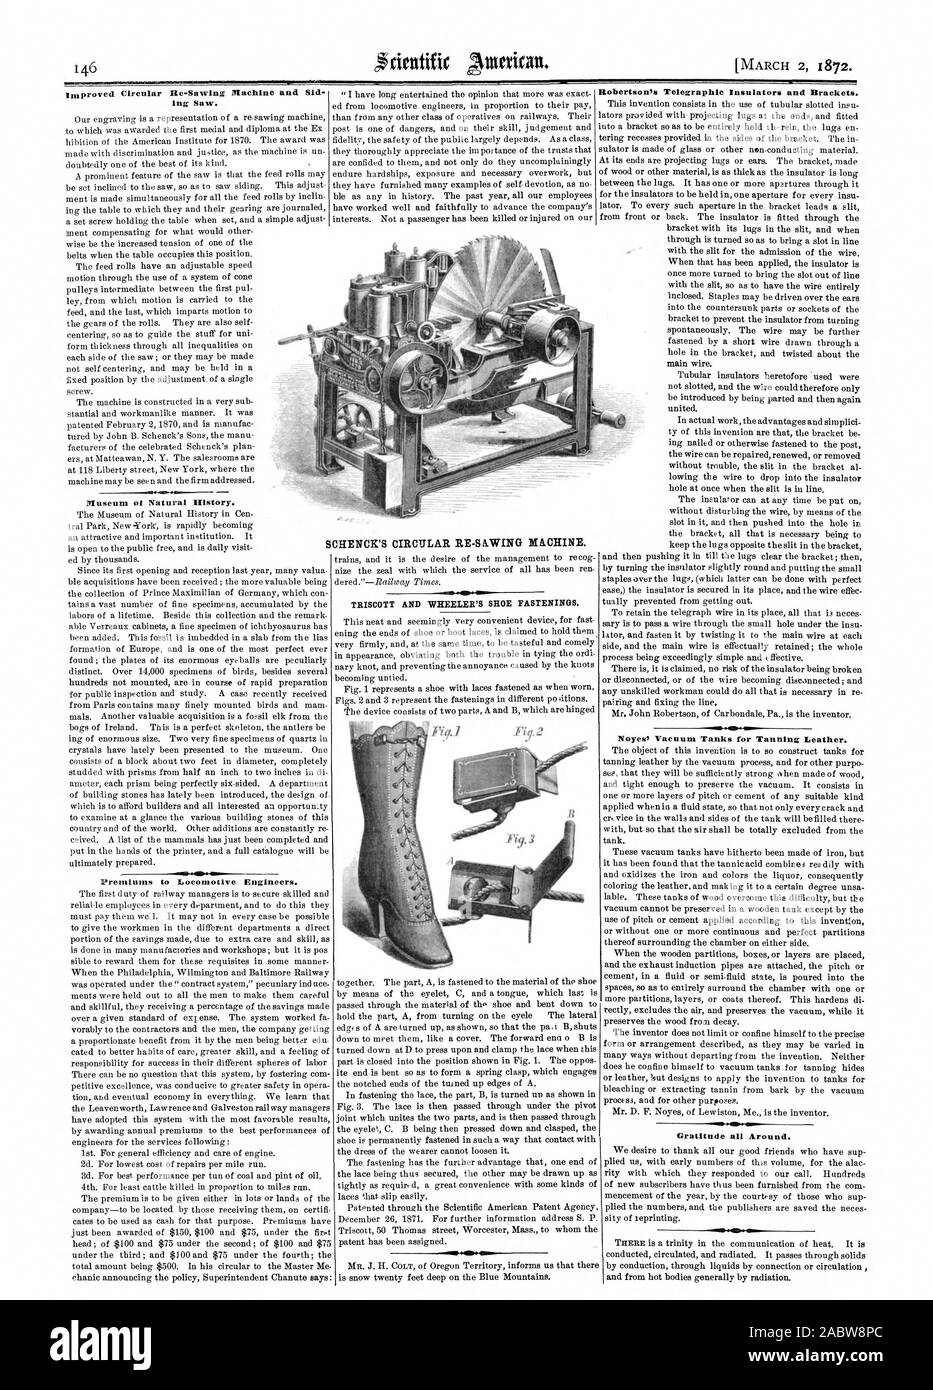 lug Saw. Museum of Natural History. Premiums to Locomotive Engineers. Robertson's Telegraphic Insulators and Brackets. Noyes' 'Vacuum Tanks for Tanning Leather.  41.4.s. Gratitude all Around. SCHENCK'S CIRCULAR RE-SAWING MACHINE., scientific american, 1872-03-02 Stock Photo